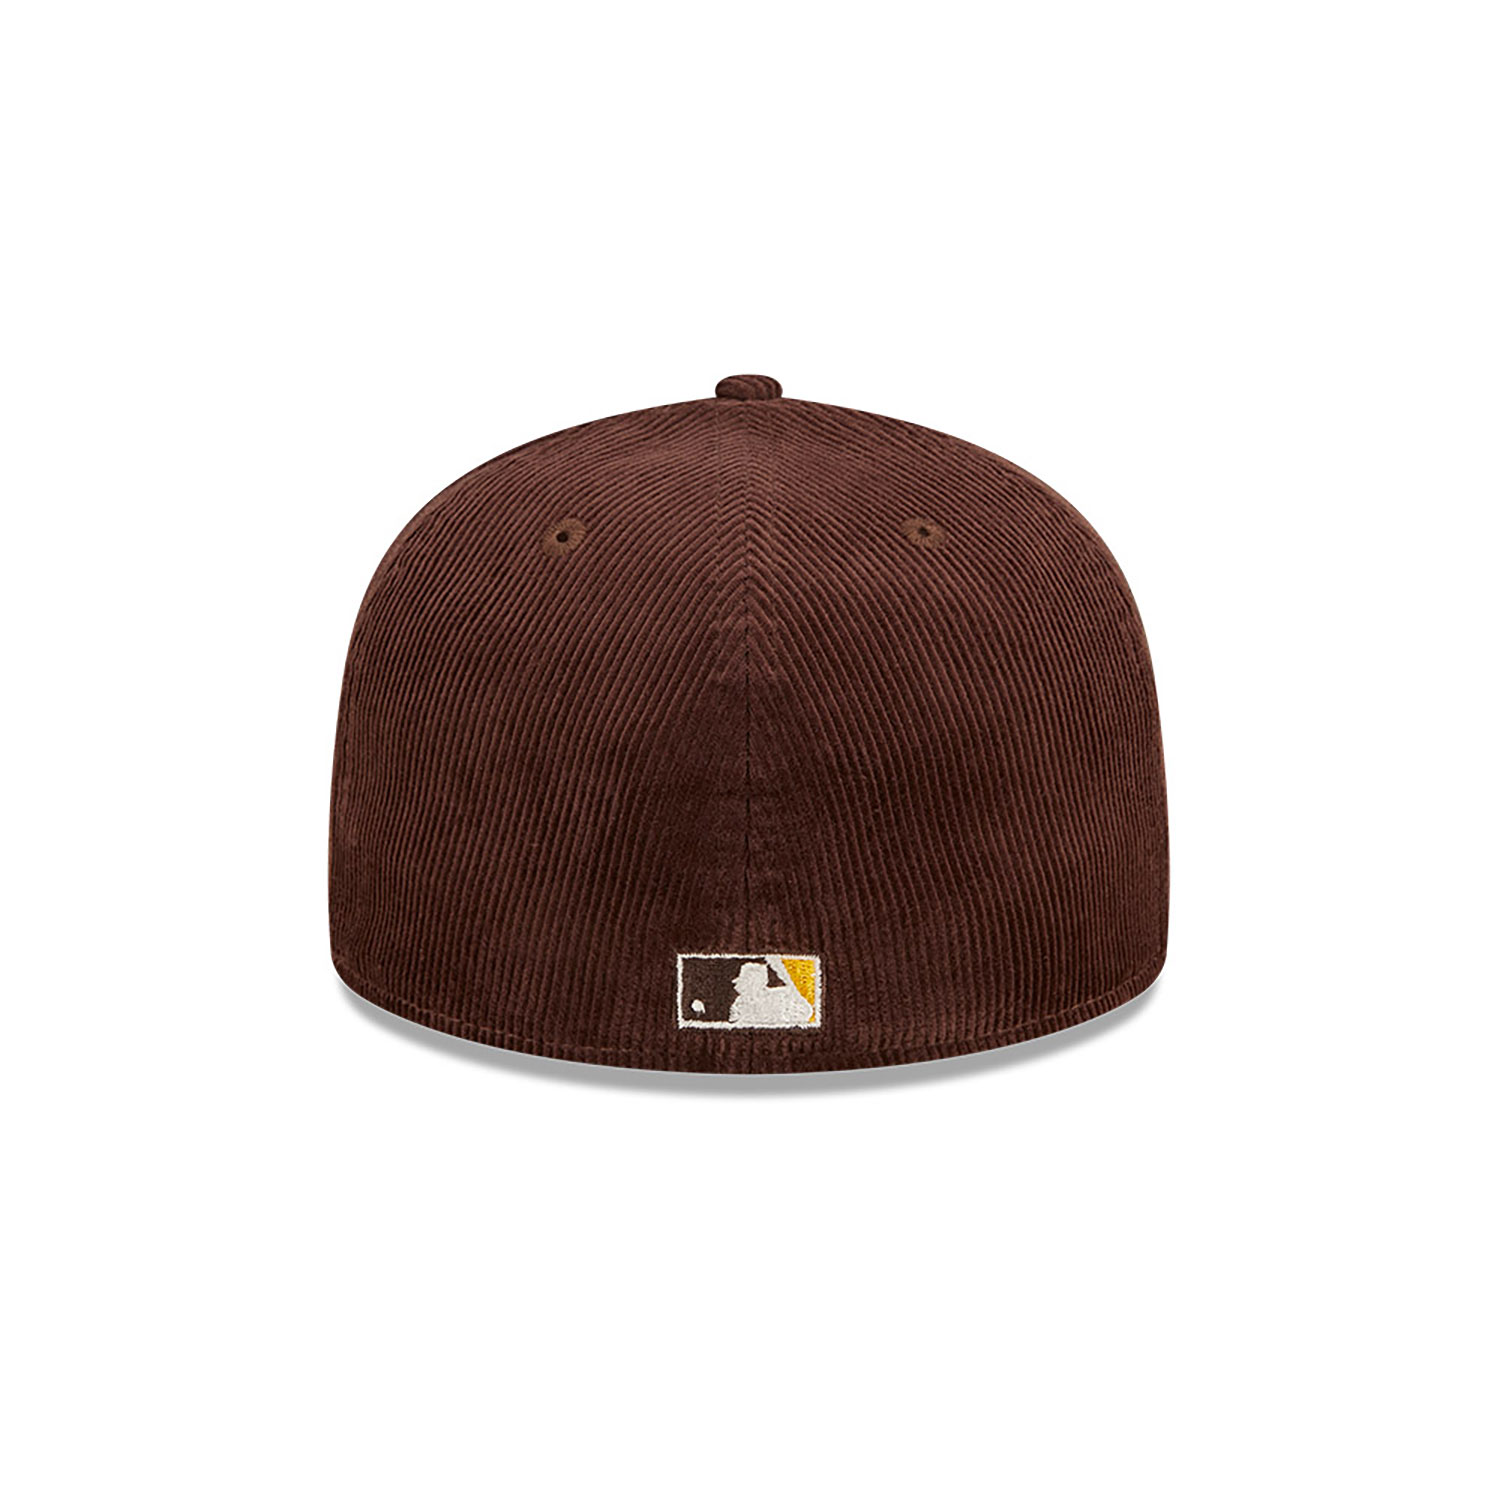 San Diego Padres Cooperstown Dark Brown 59FIFTY Fitted Cap